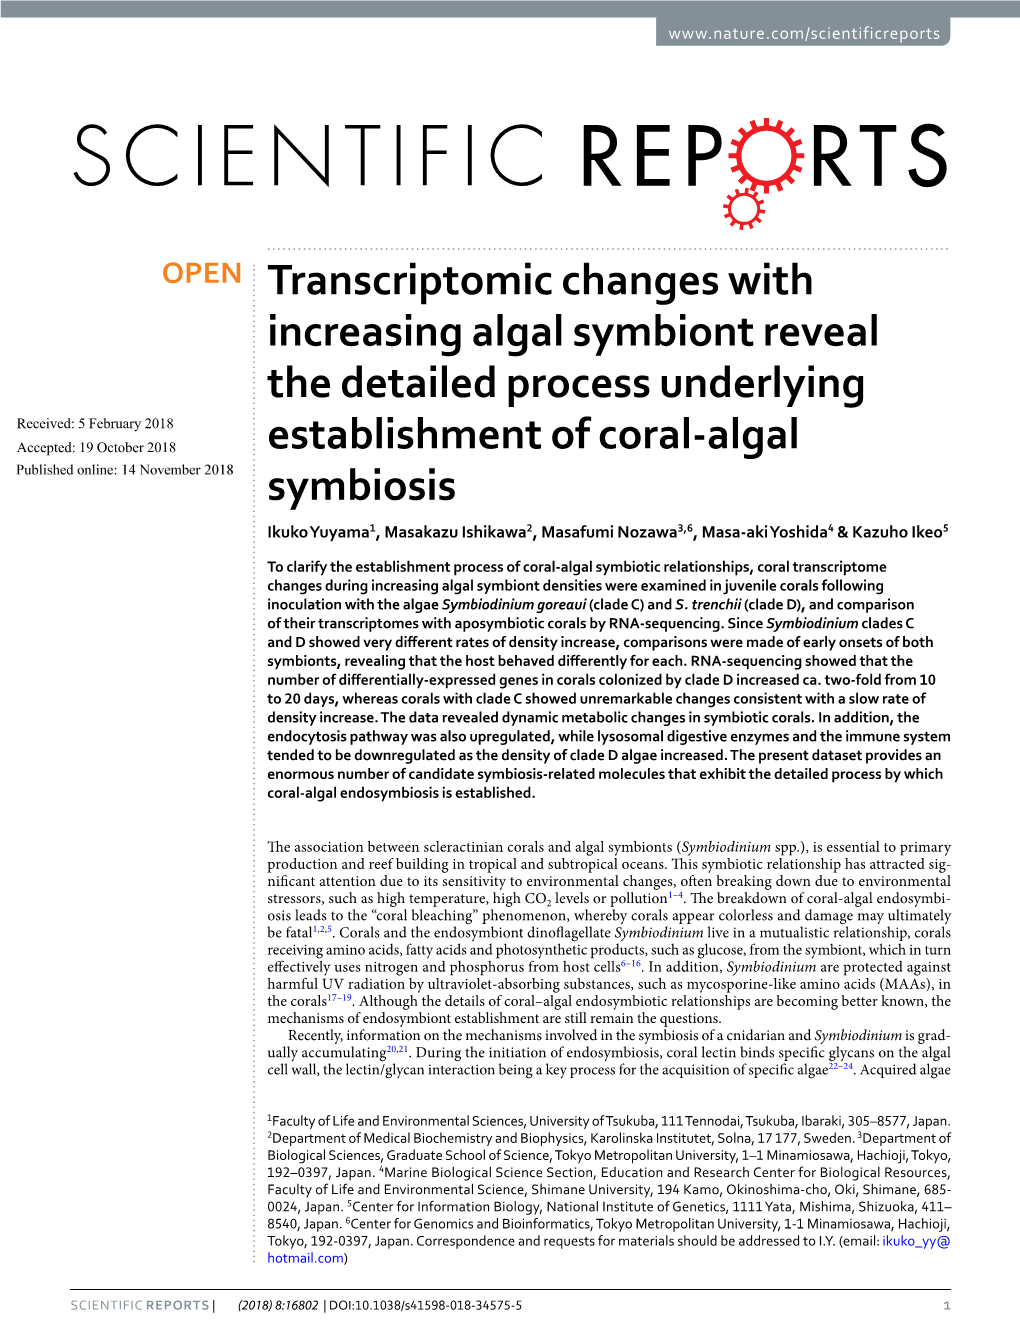 Transcriptomic Changes with Increasing Algal Symbiont Reveal